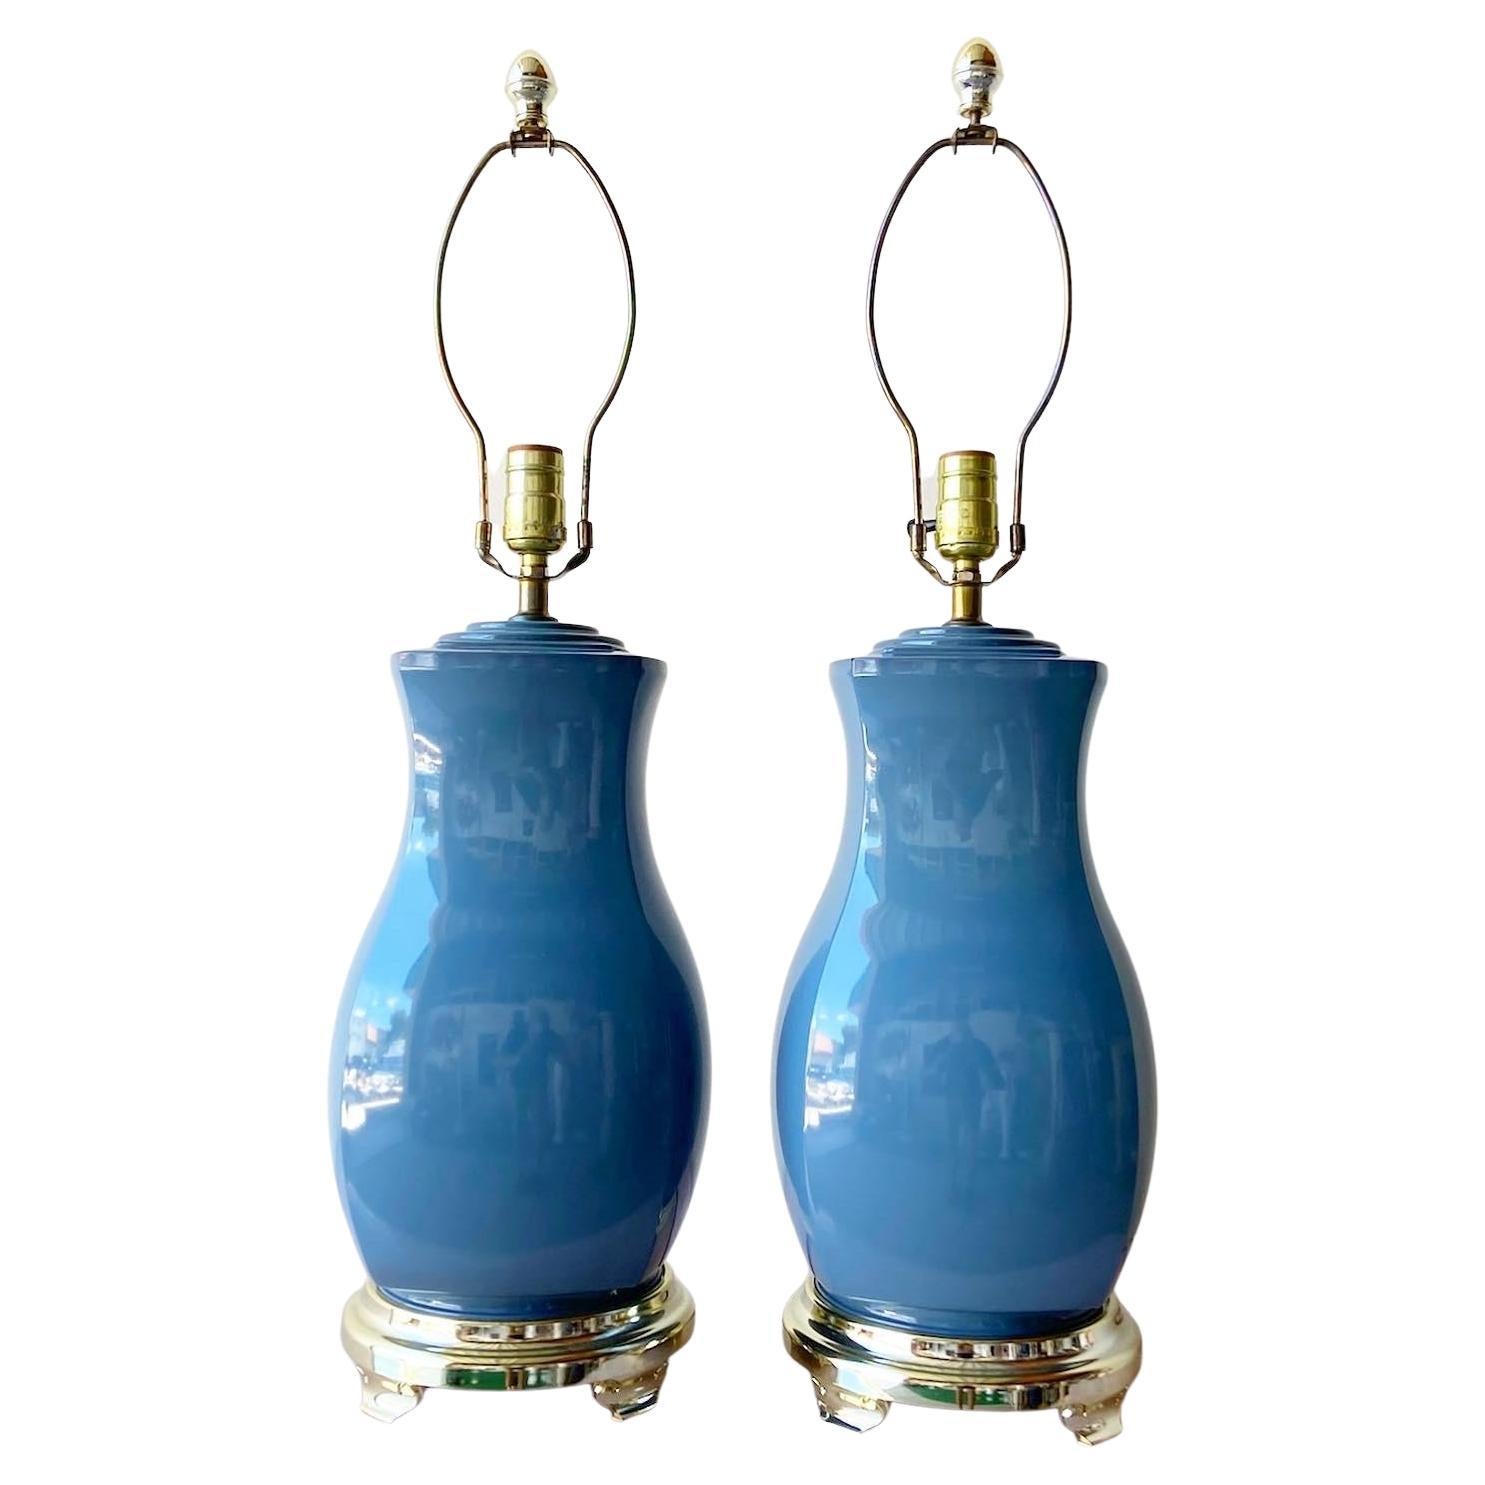 Postmodern Blue Porcelain Table Lamps With Gold Base - a Pair For Sale